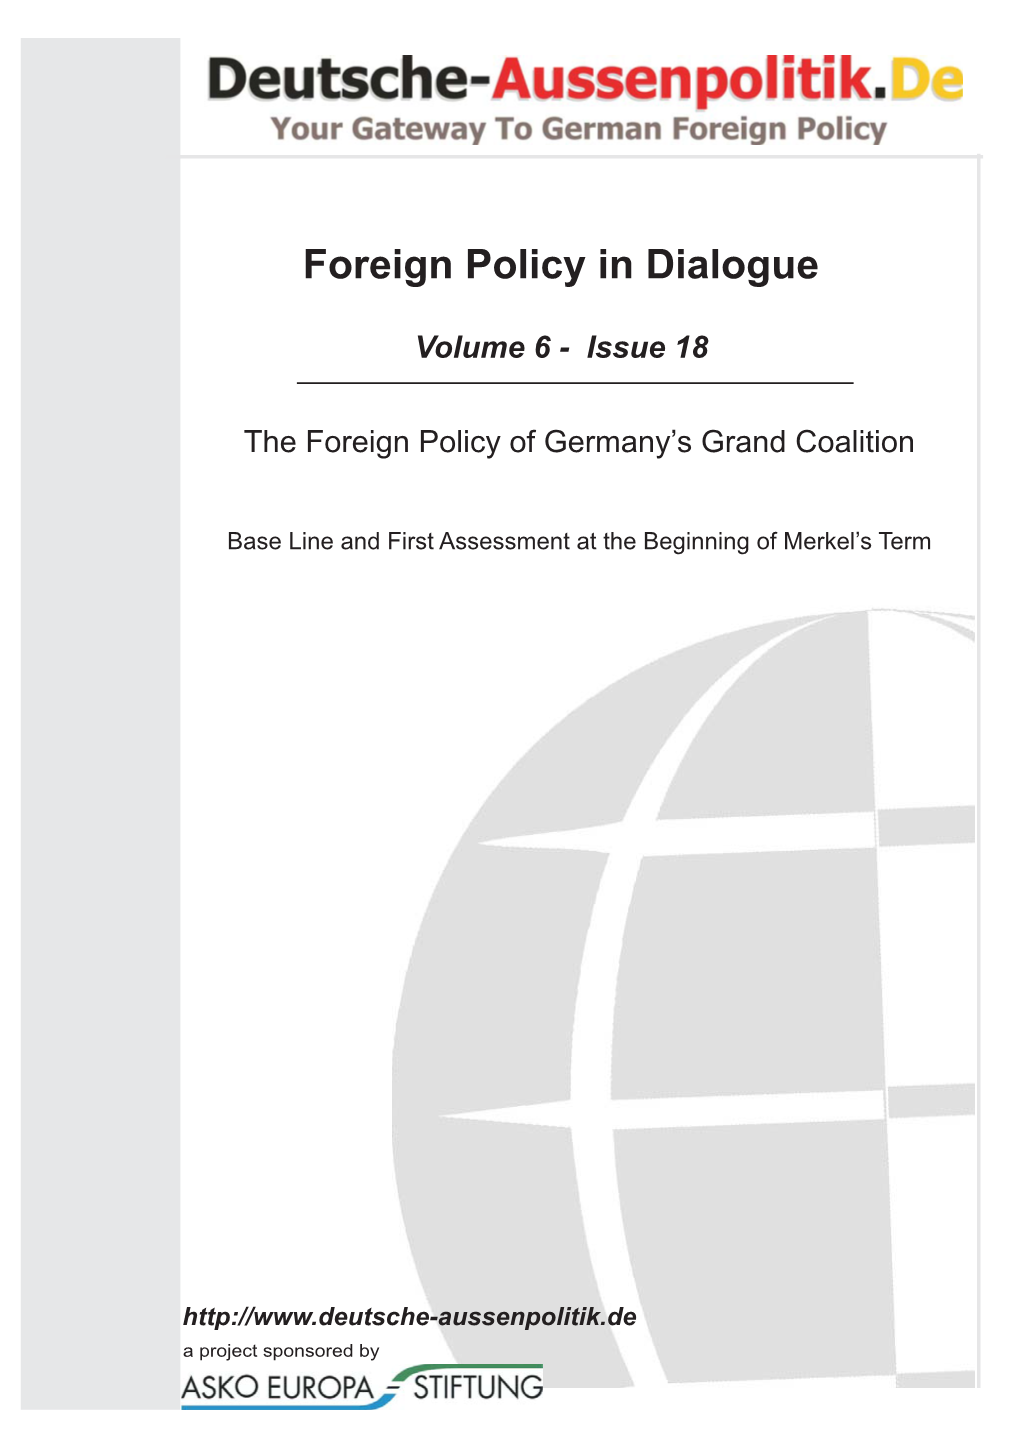 Foreign Policy in Dialogue